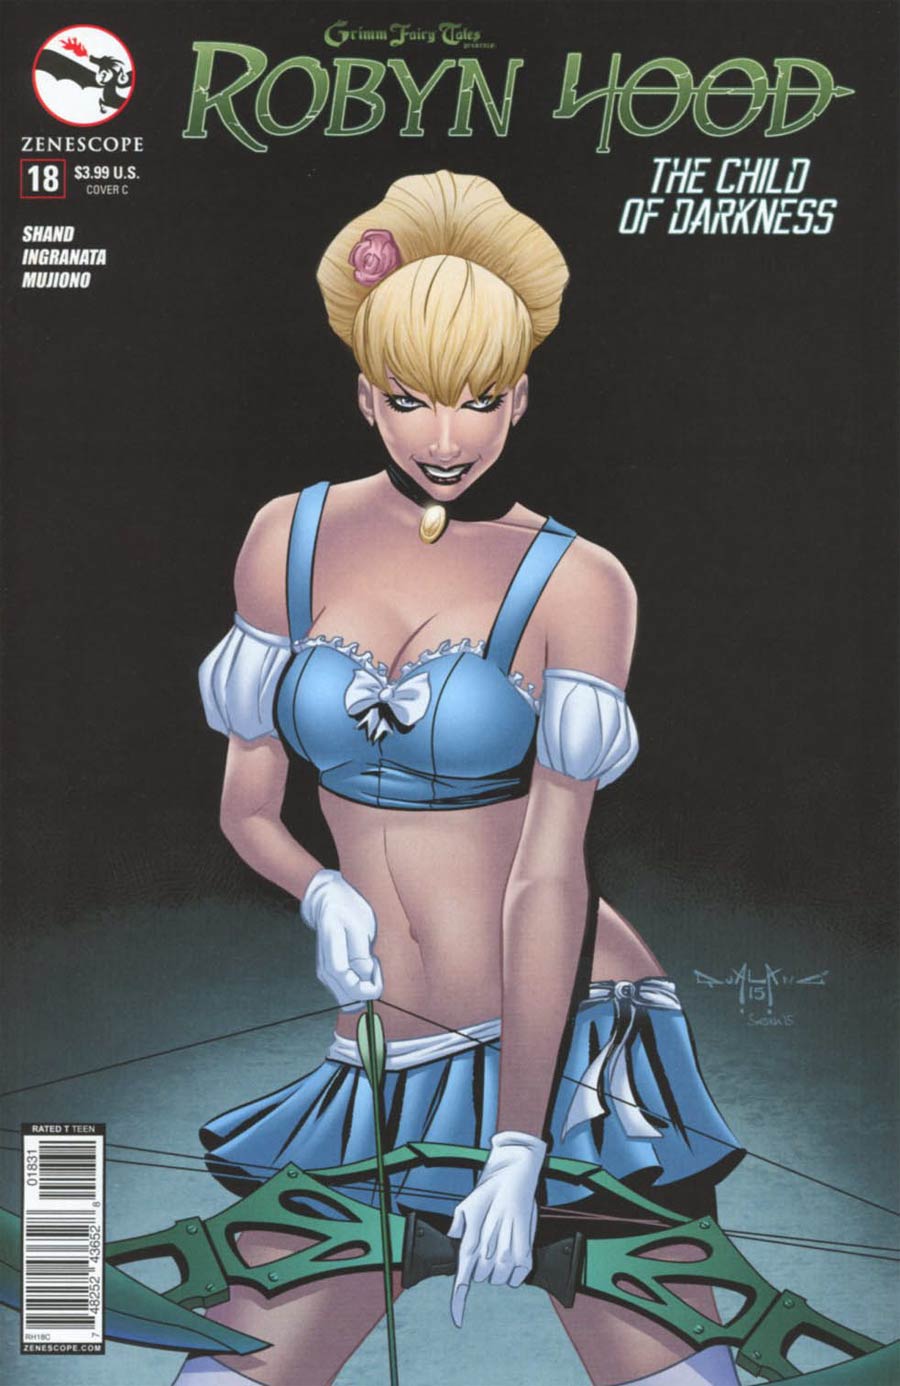 Grimm Fairy Tales Presents Robyn Hood Vol 2 #18 Cover C Pasquale Qualano